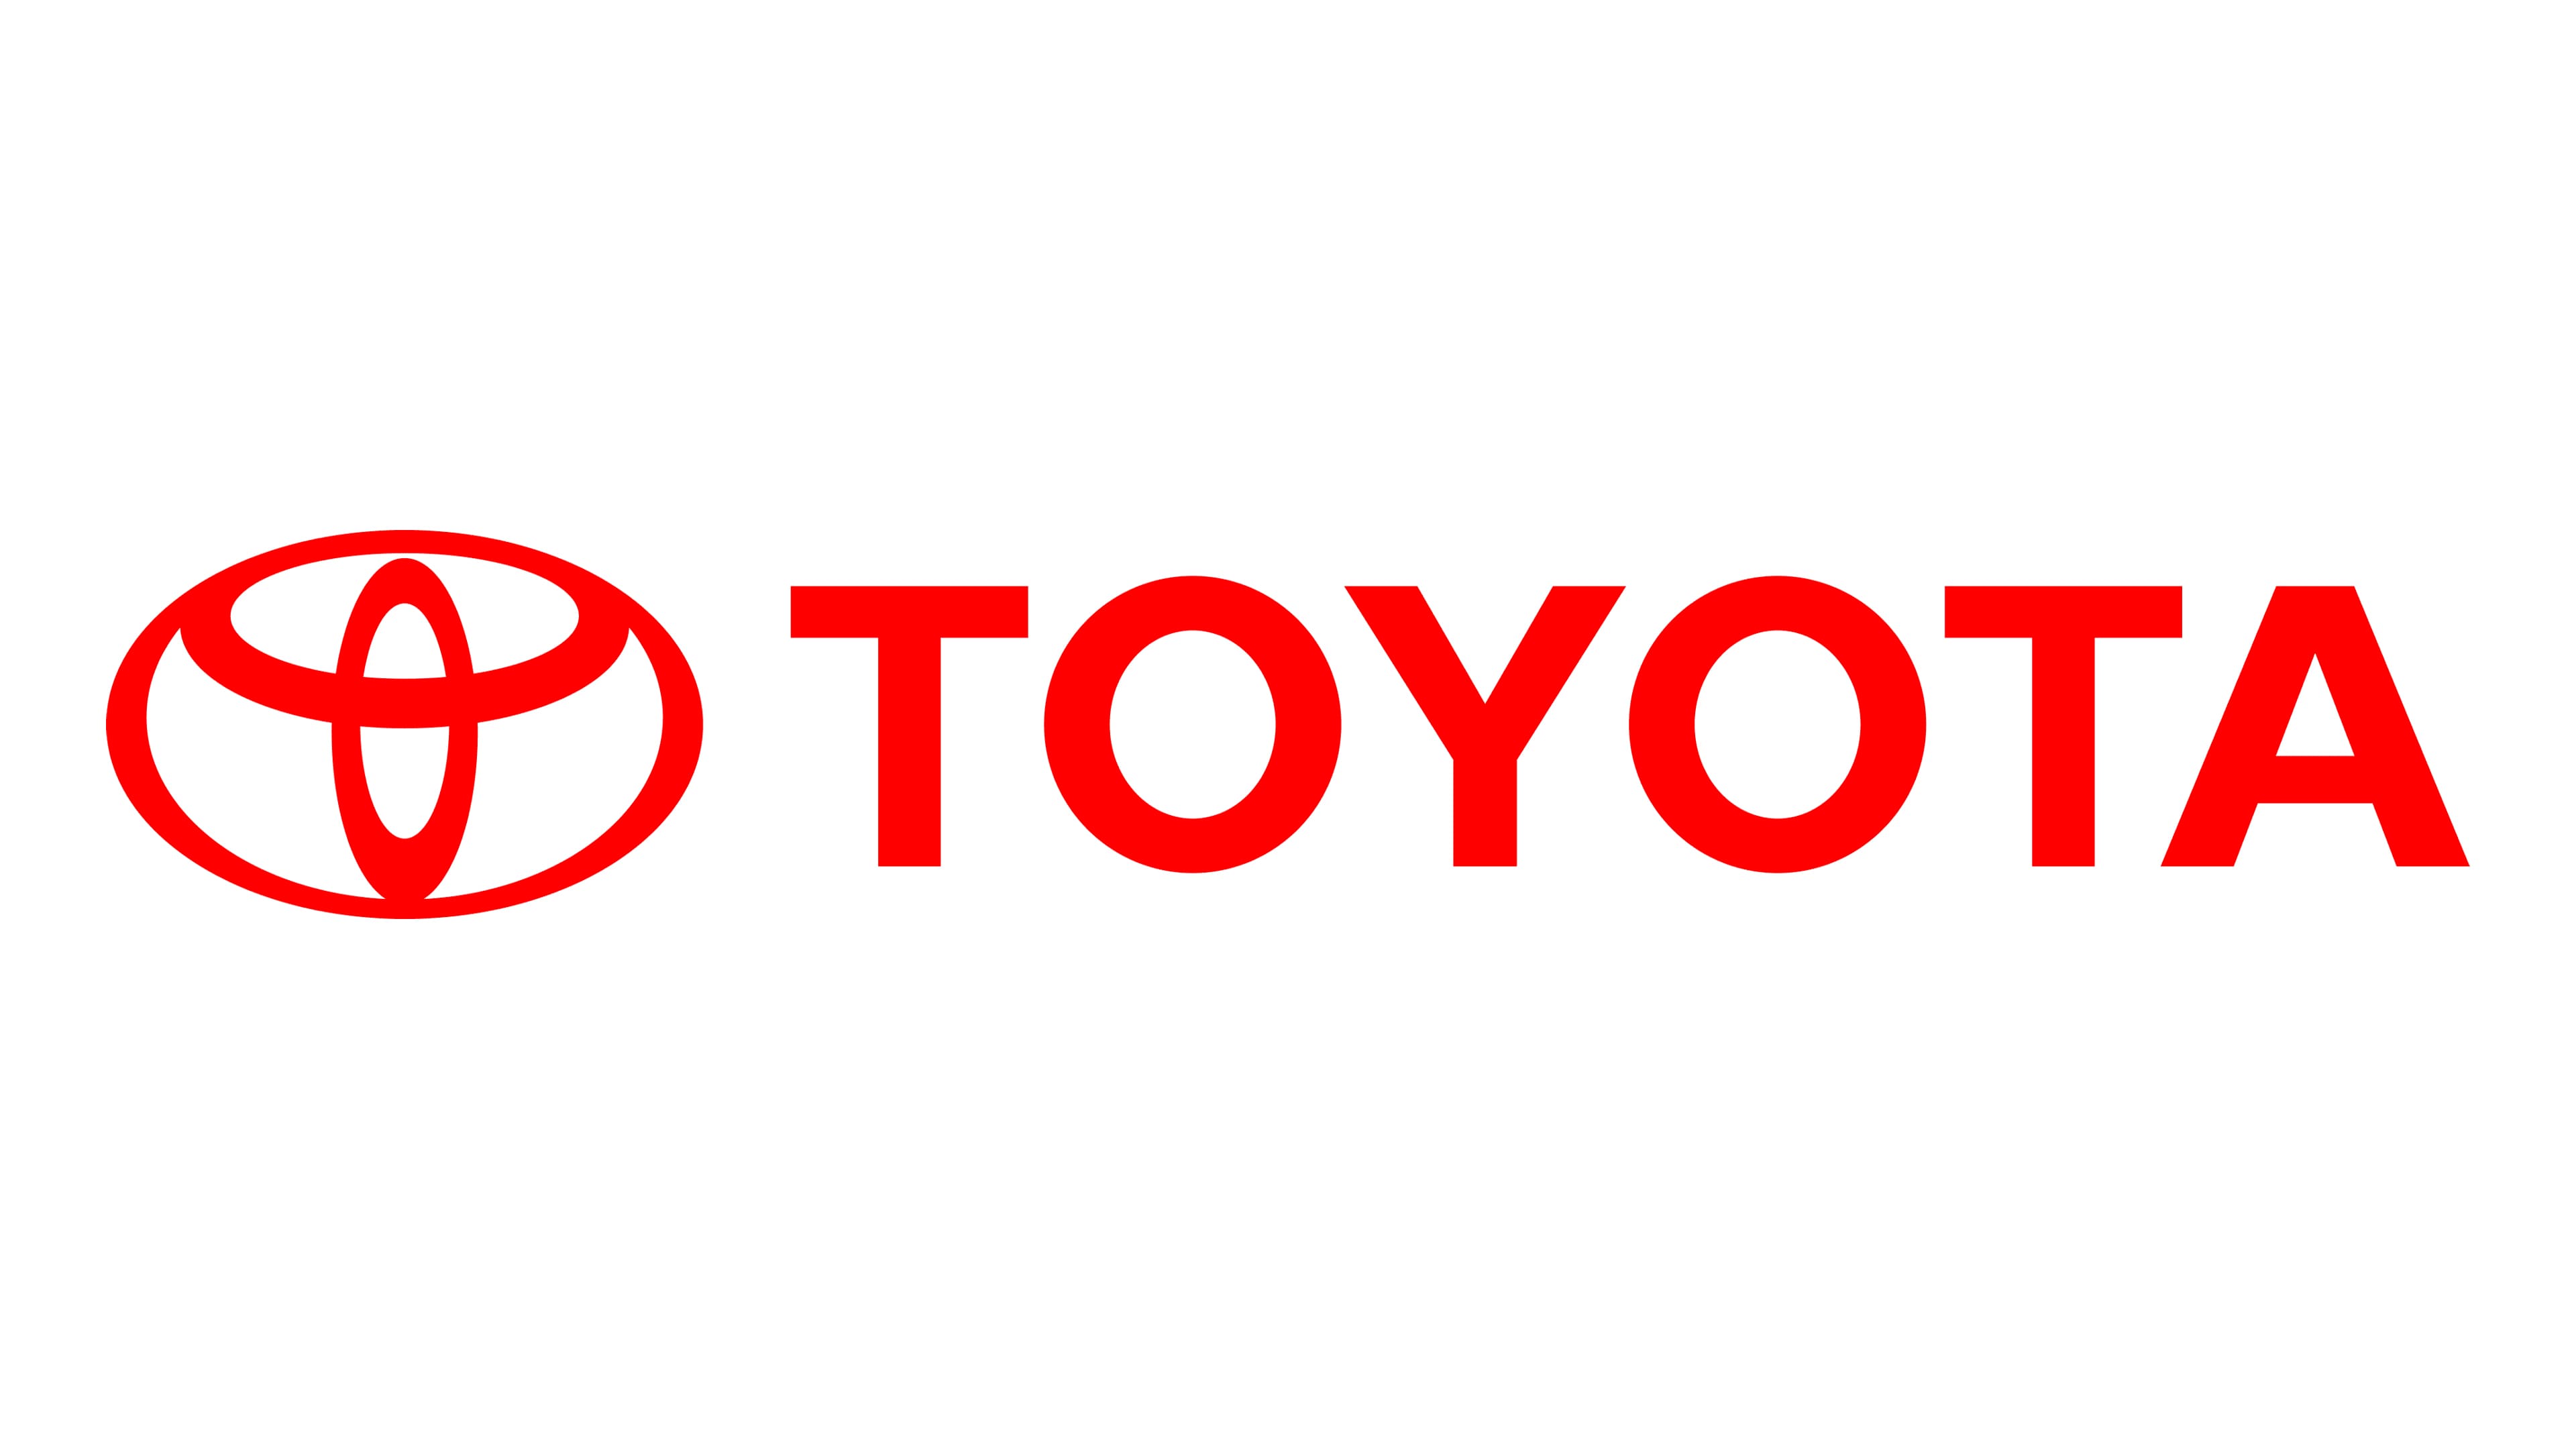 Toyota's Overlapping Ovals